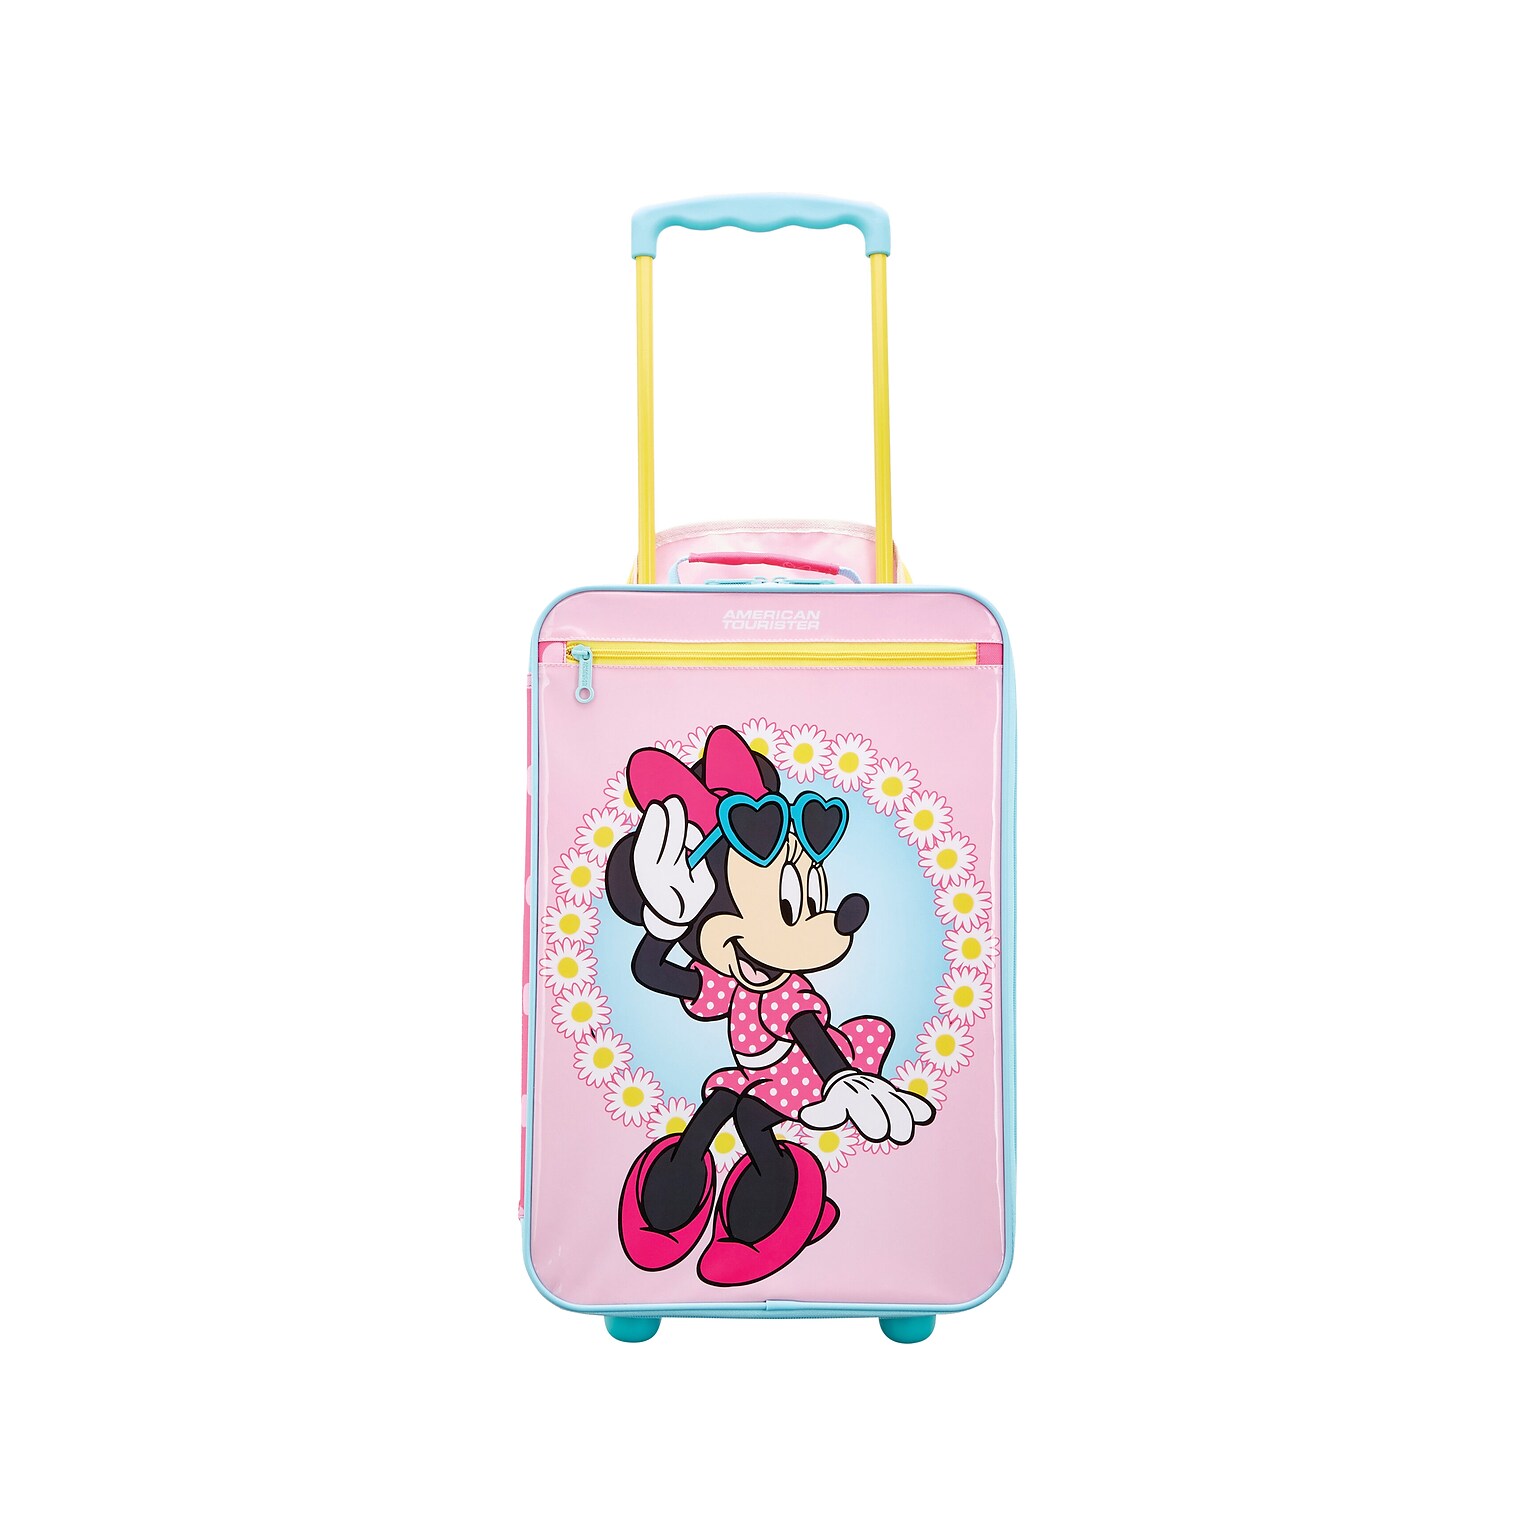 American Tourister Disney 18 Minnie Mouse Carry-On Suitcase, 2-Wheeled, Multicolor (139451-4451)